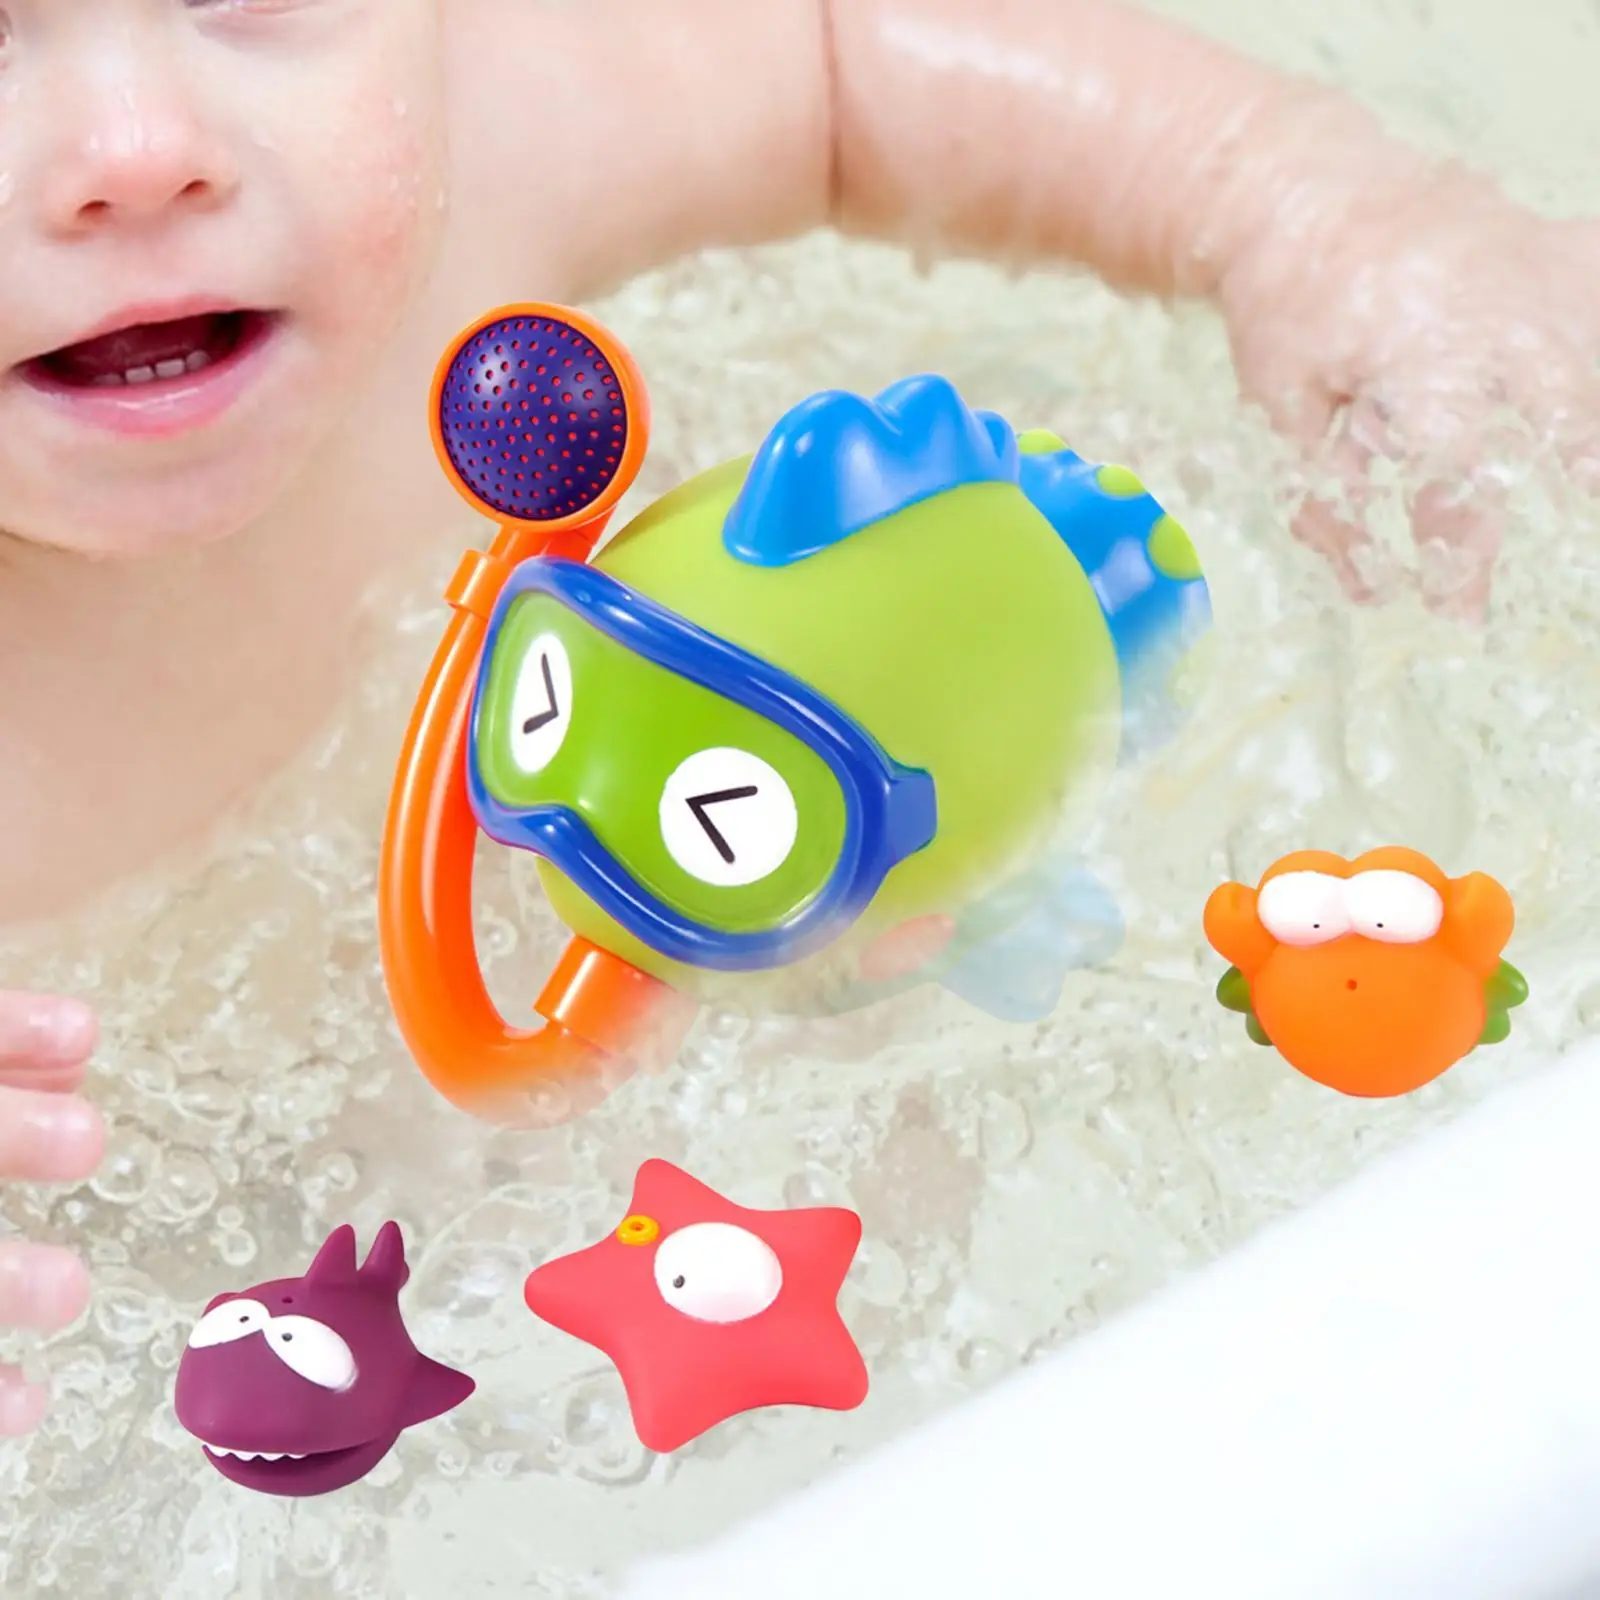 4 Pieces Toddlers Bath Shower Toys Bath Tub Toys Ocean Sea Animal Bathtub Toys for Toddlers Girls Boys Baby Great Gifts